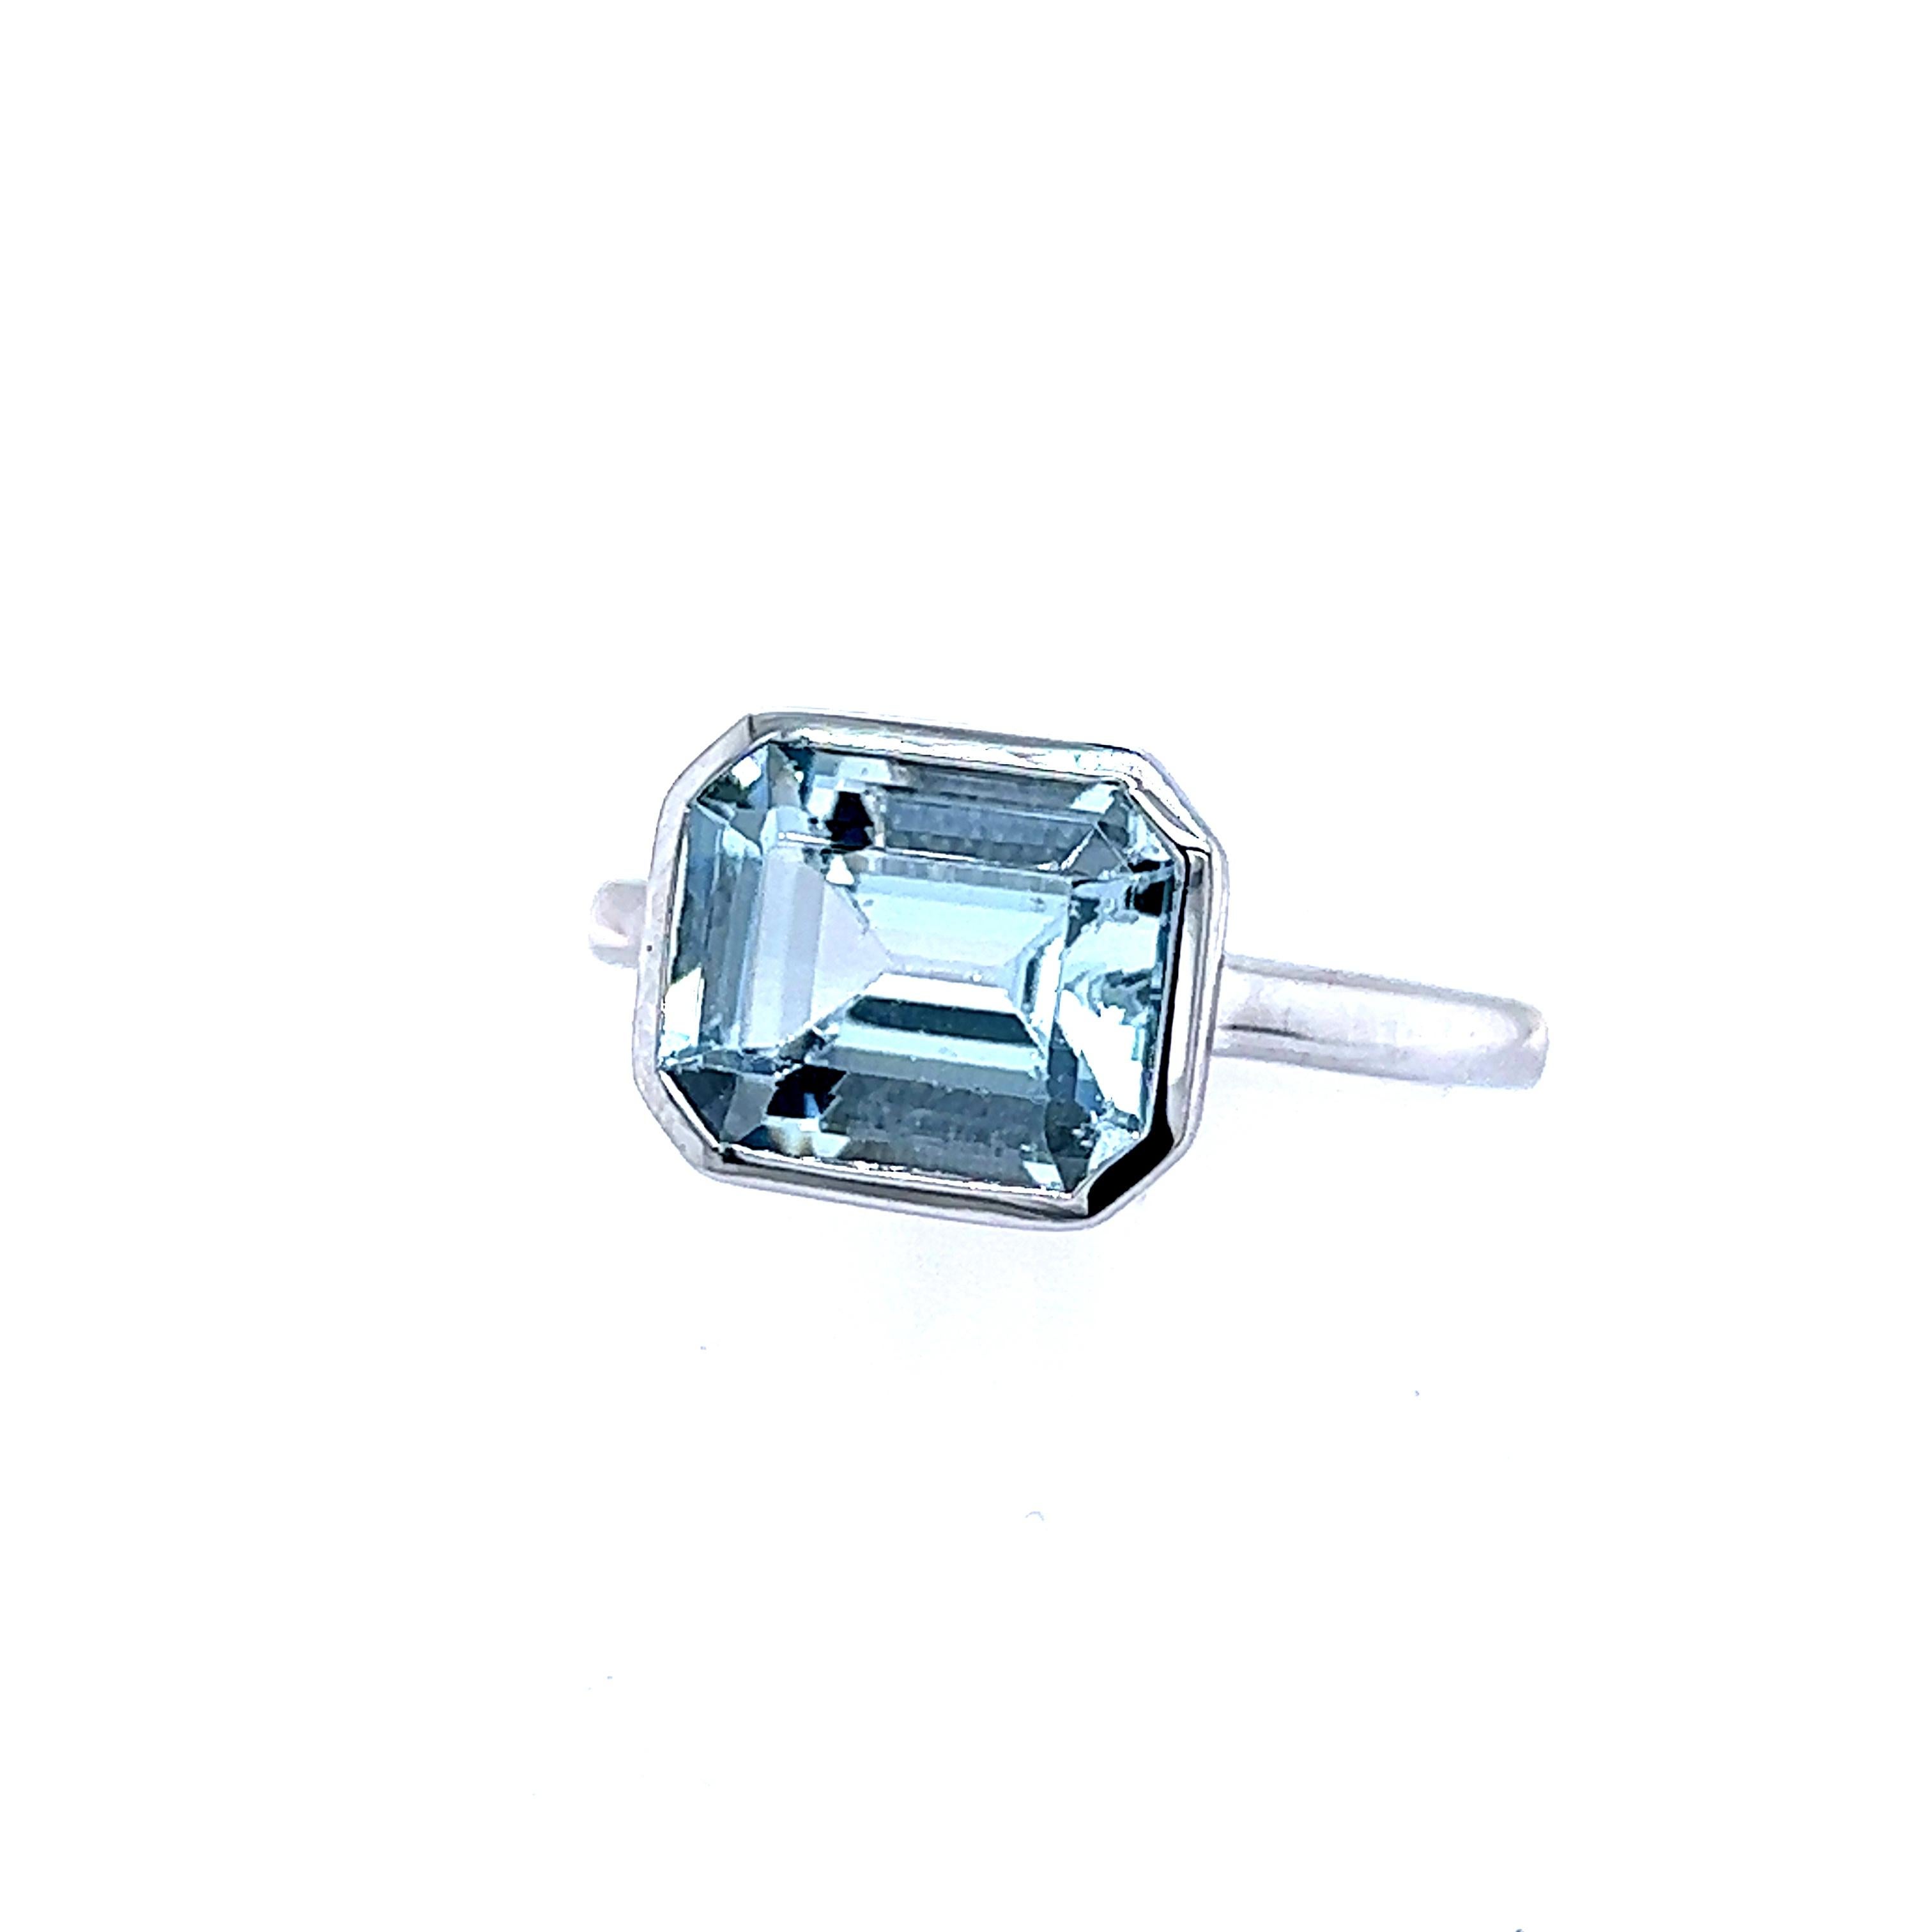 Natural Aquamarine Ring 6.5 14k White Gold 3.21 TCW Certified For Sale 4